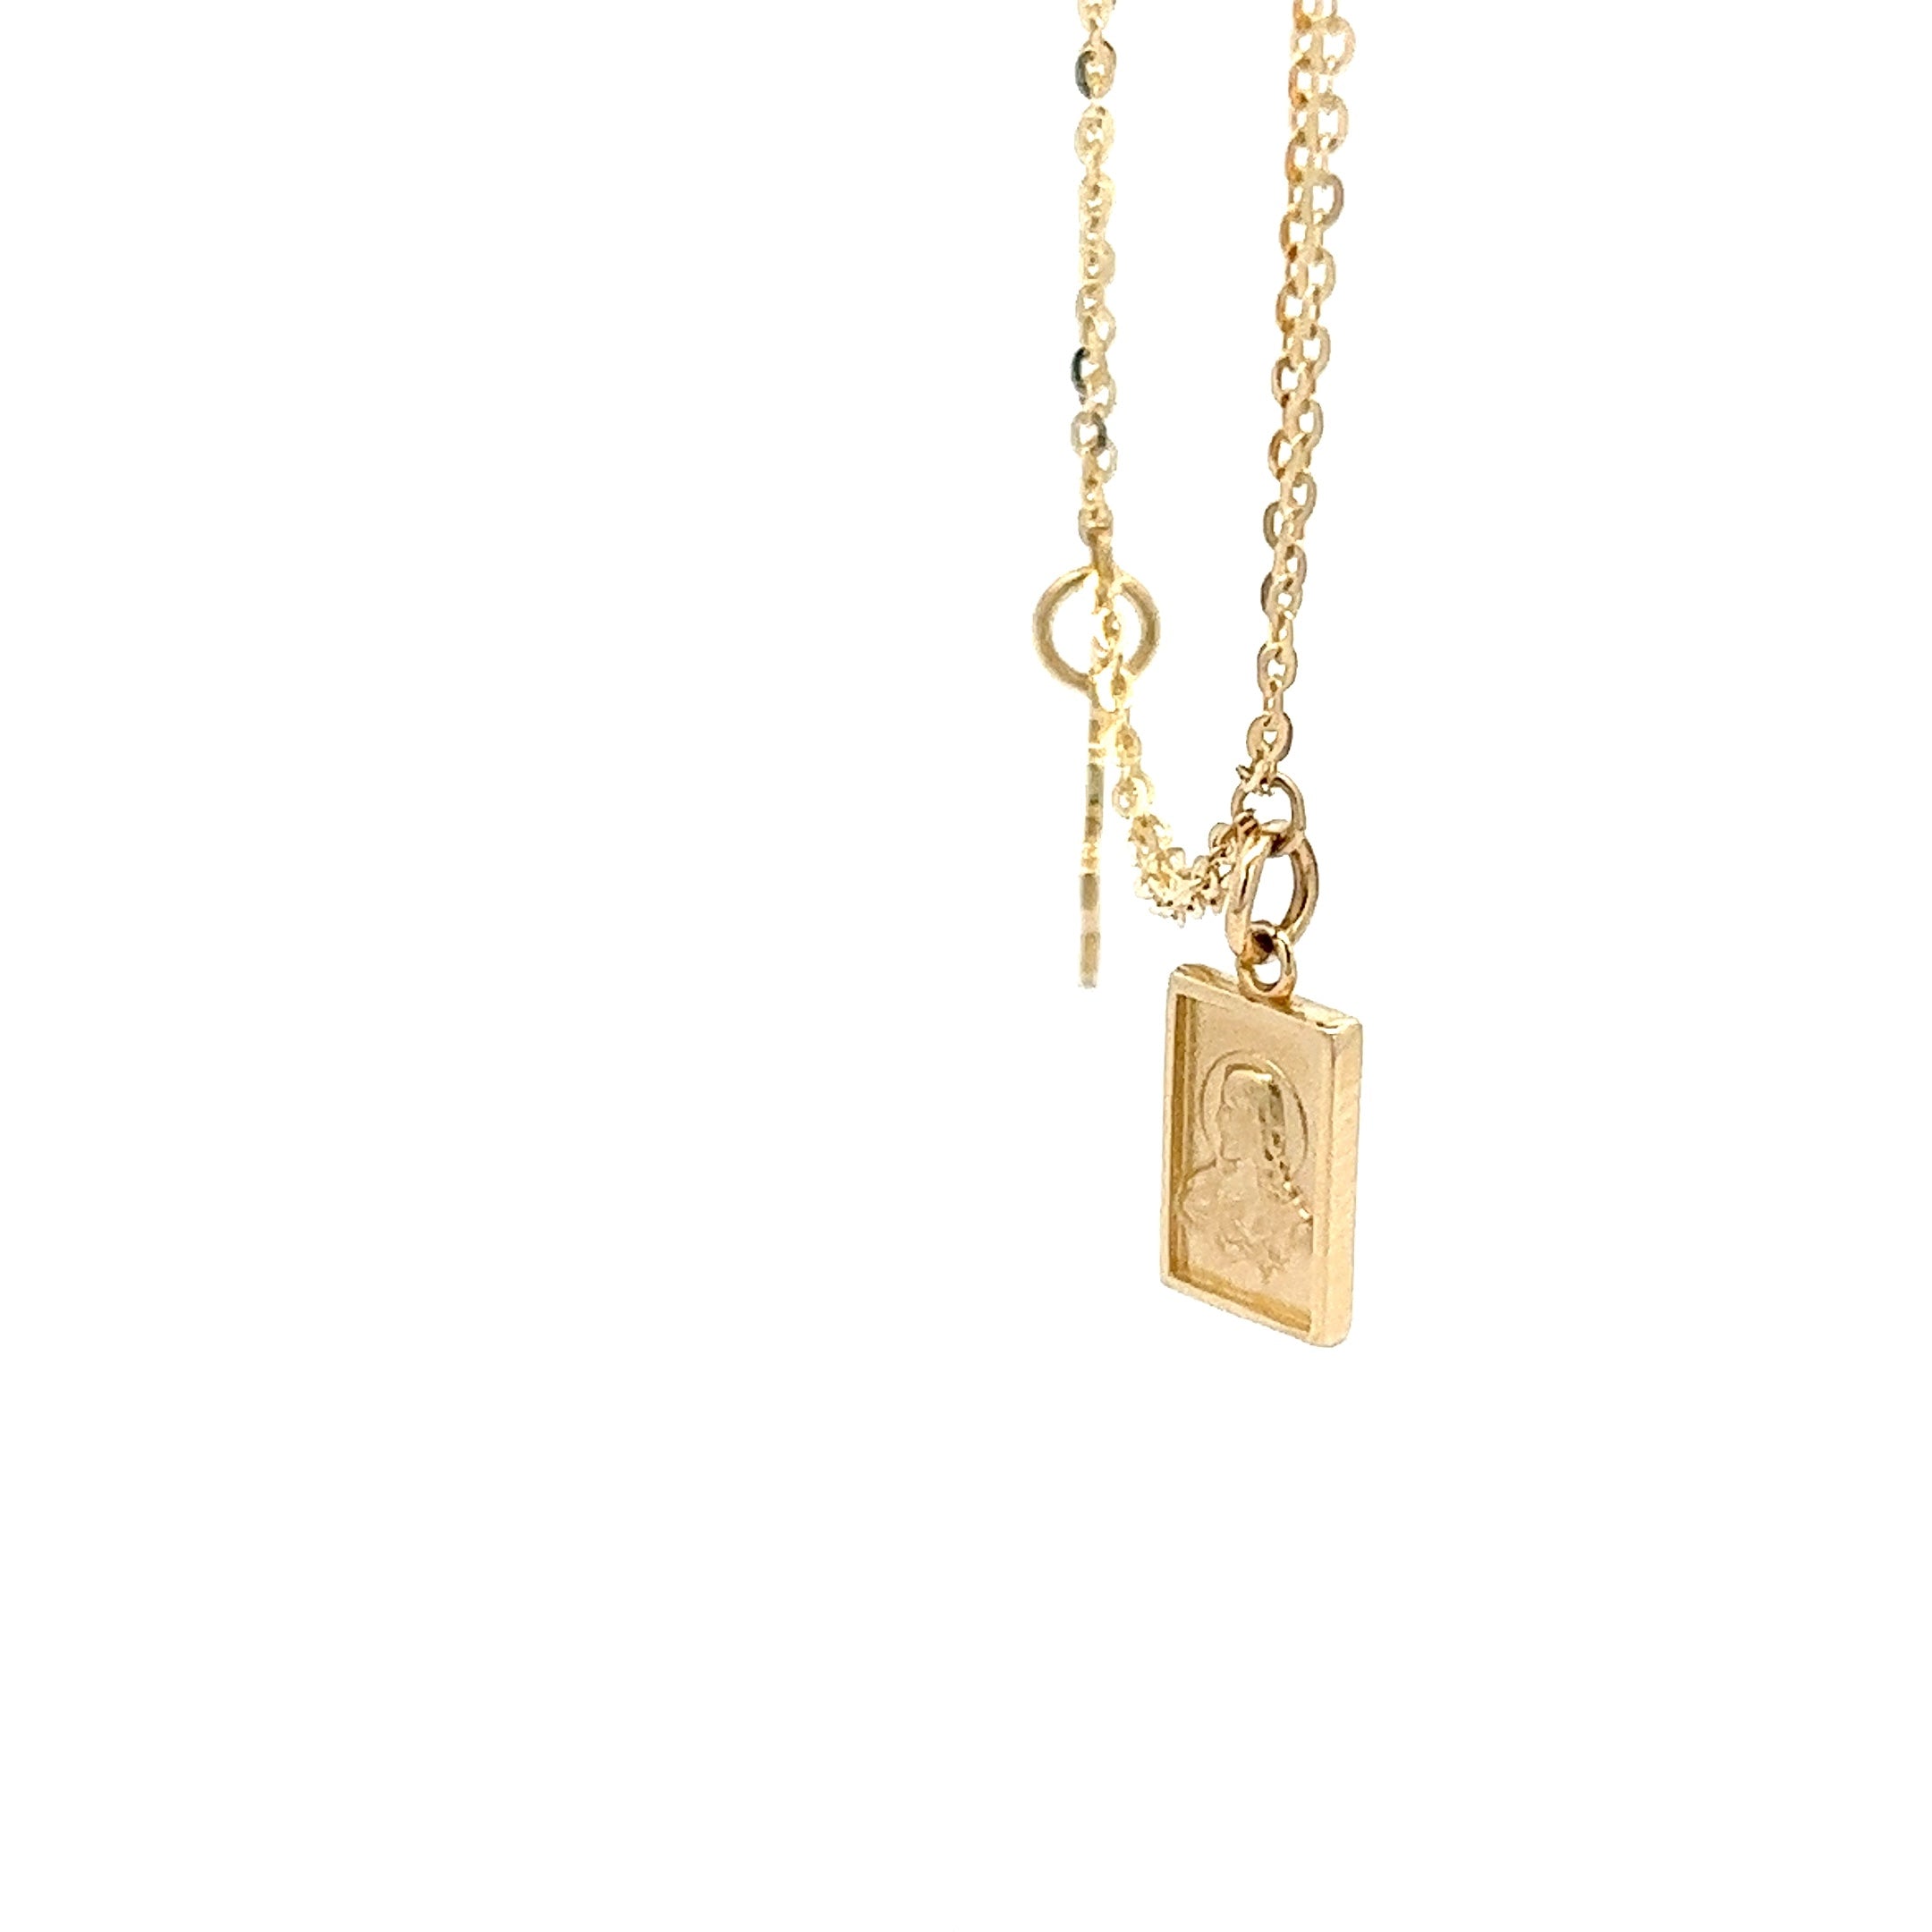 DOUBLE CHAIN BRACELET WITH DOUBLE SCAPULARY PENDANT SET IN 14K YELLOW GOLD